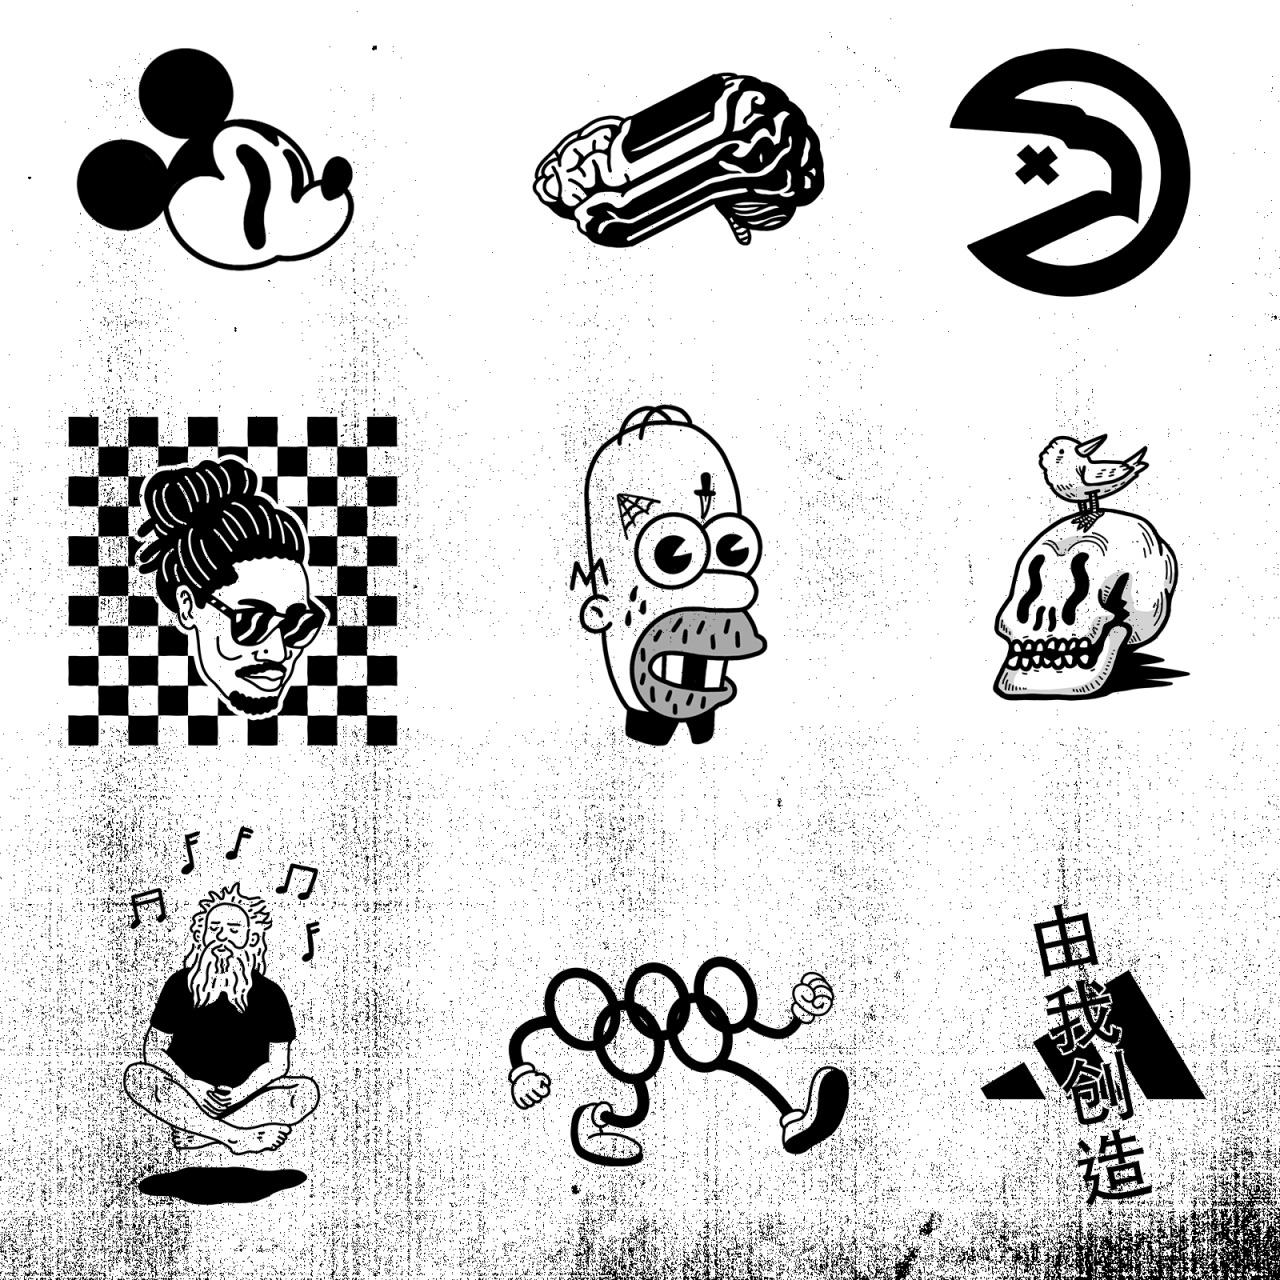 Icons for a portfolio redesign that may never happen.